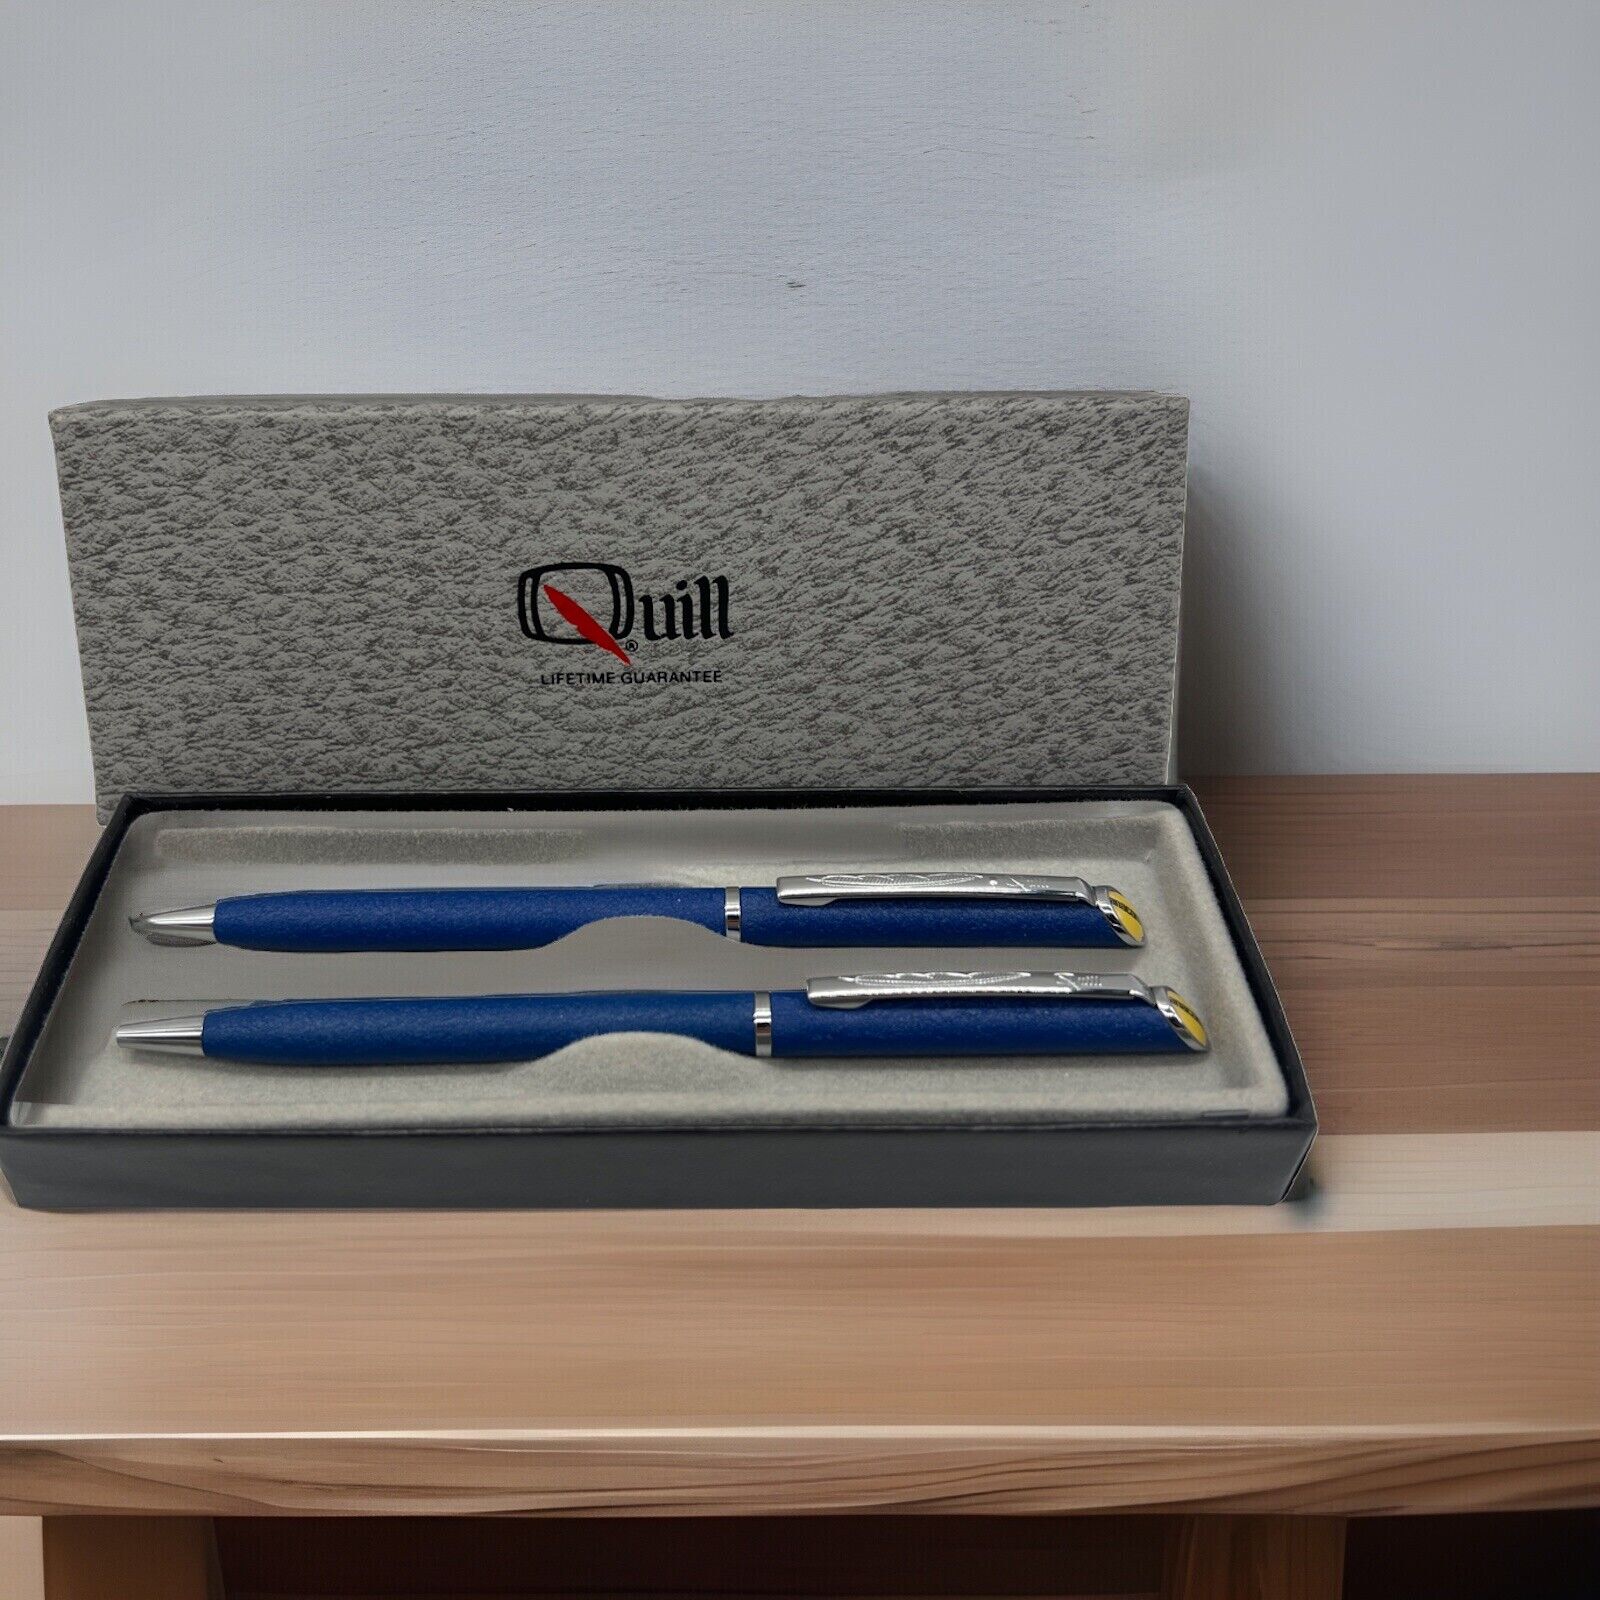 Quill Lifetime Guaranteed Set of 2 Pen & Pencil Blue Stationary Office Supplies